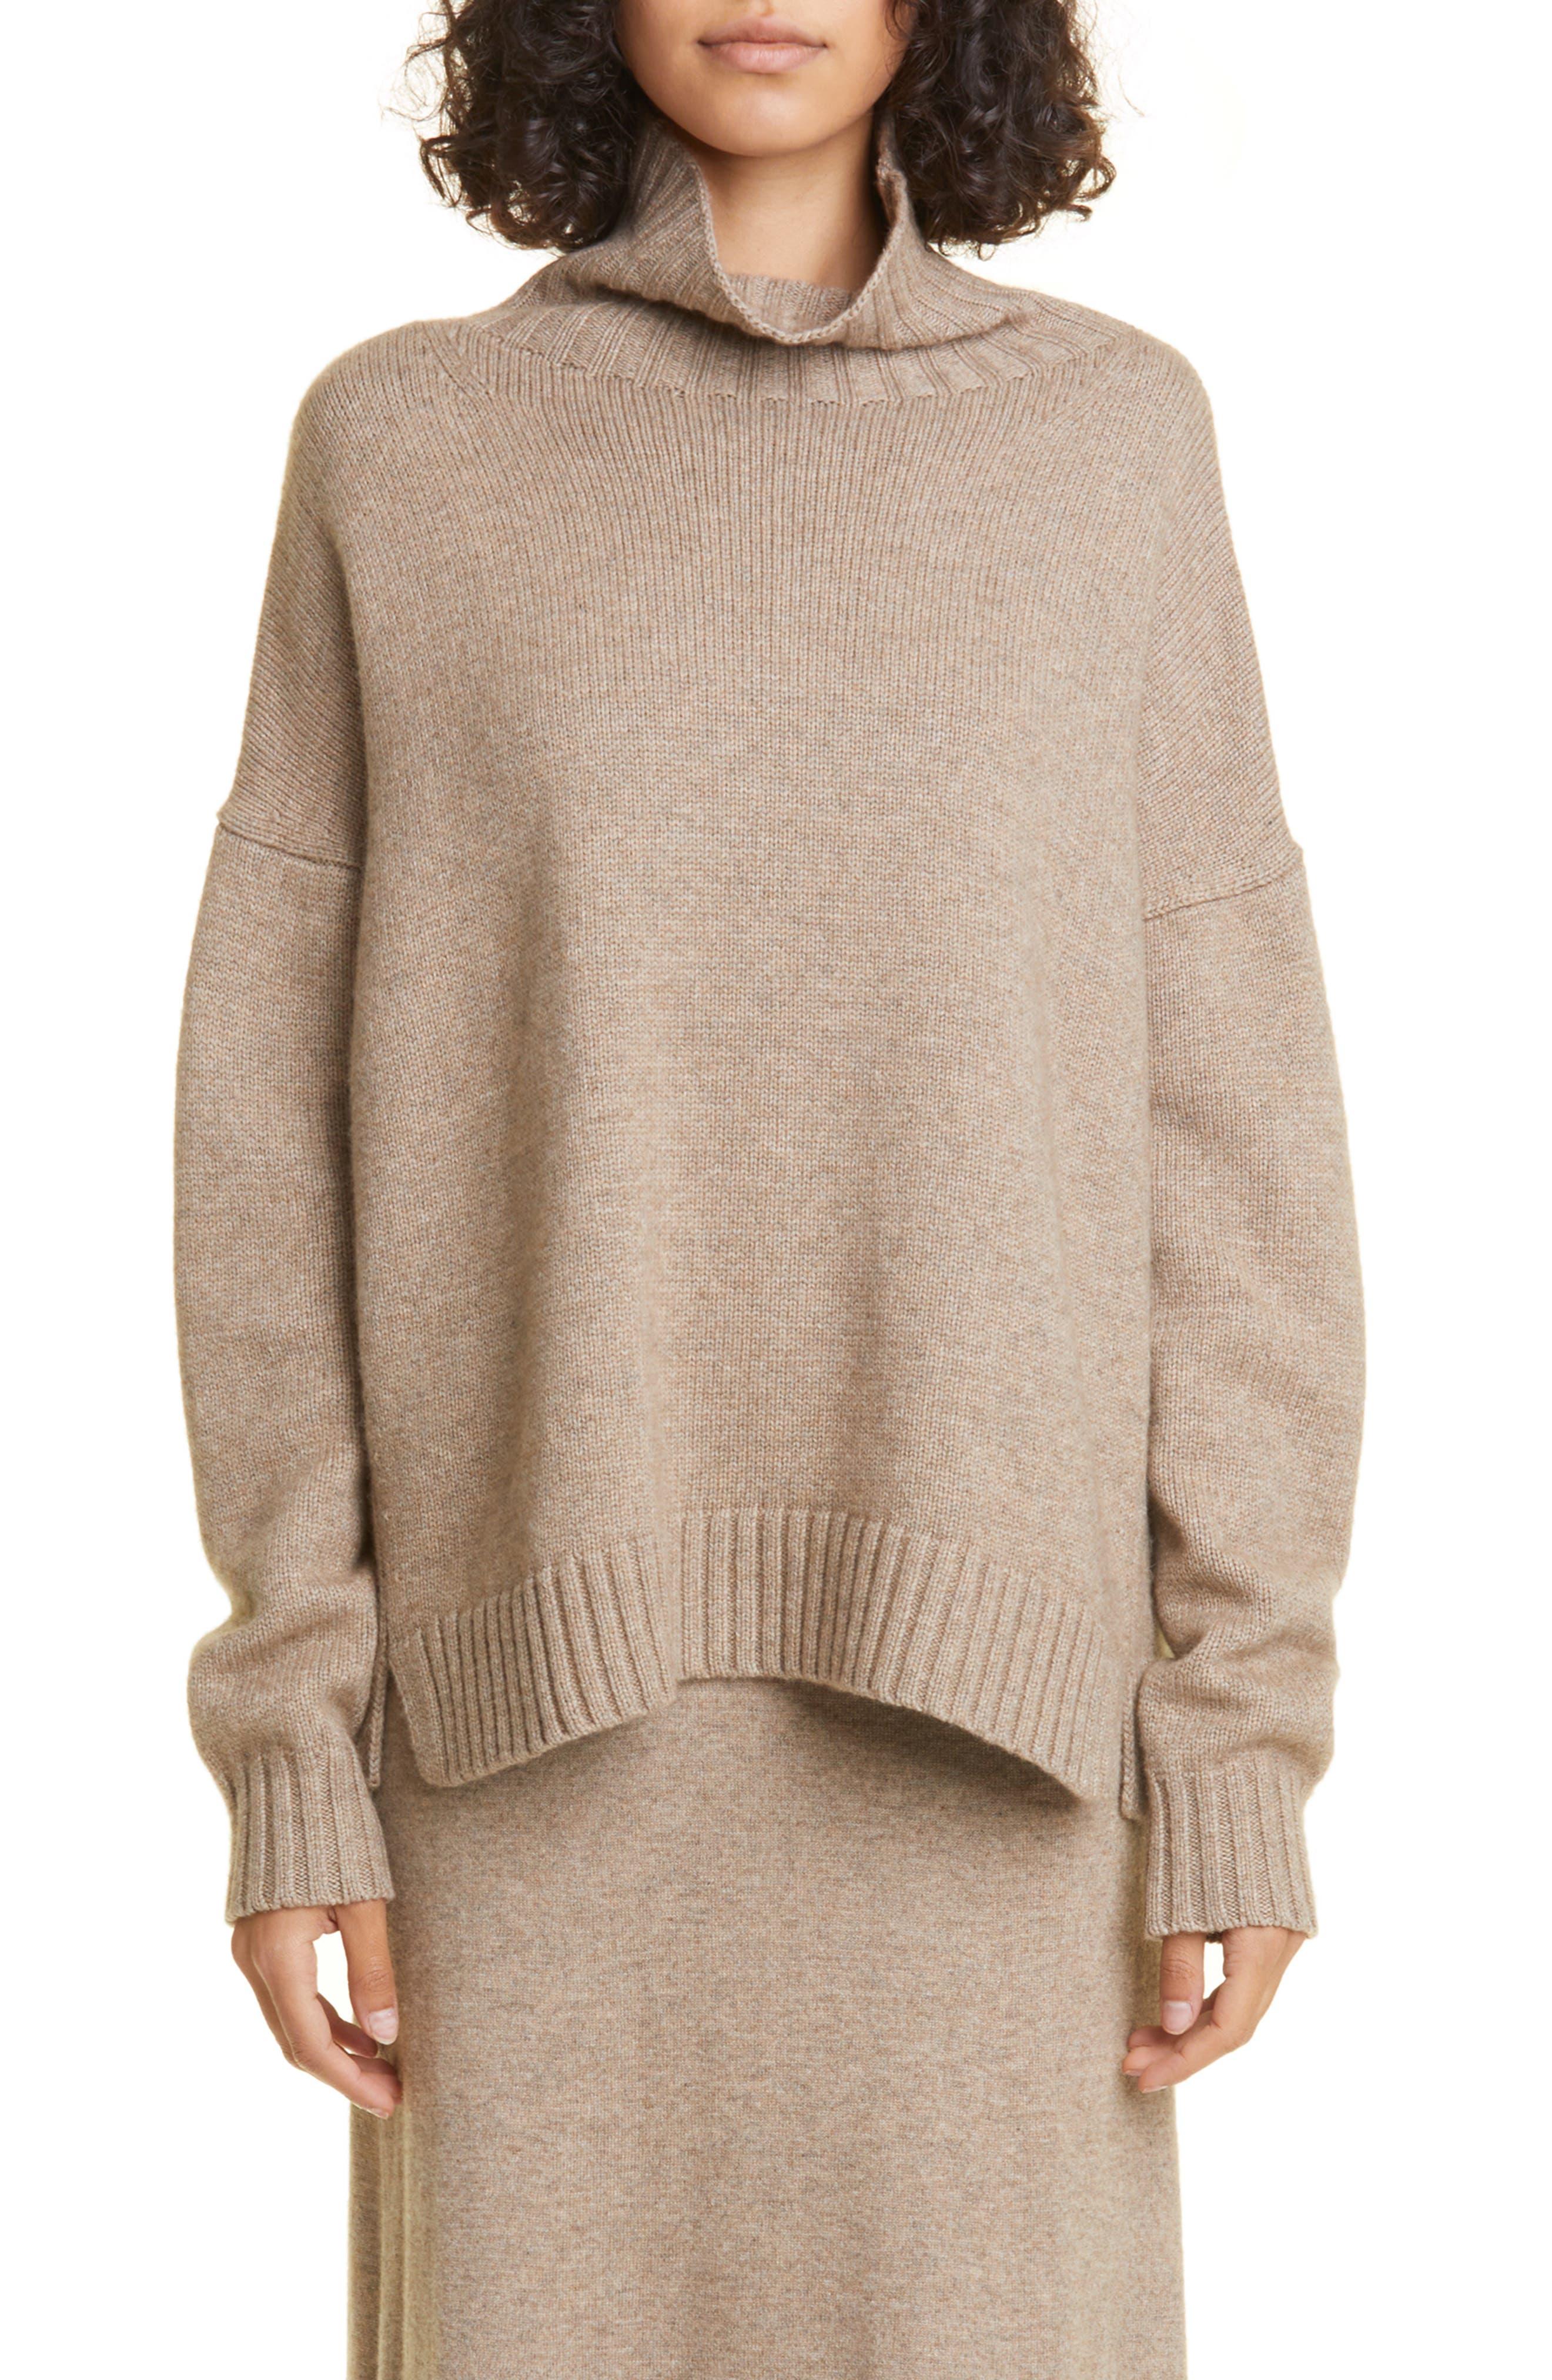 Max Mara Gianna Funnel Neck Wool & Cashmere Sweater in Natural | Lyst